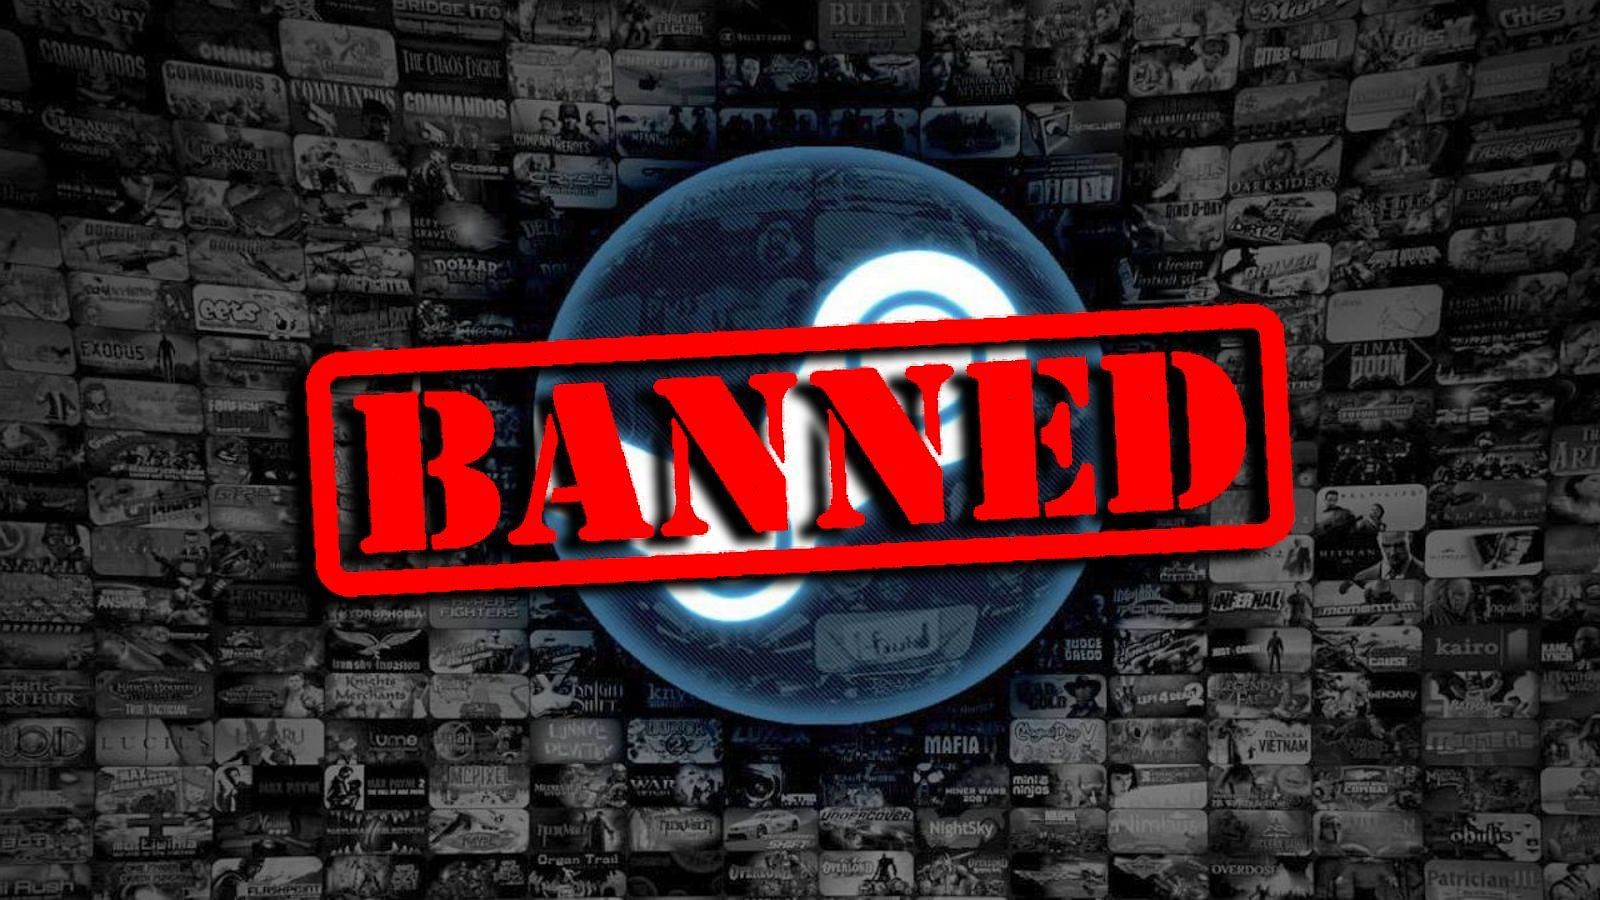 The global version of Steam might have been banned in China (image by Sportskeeda)